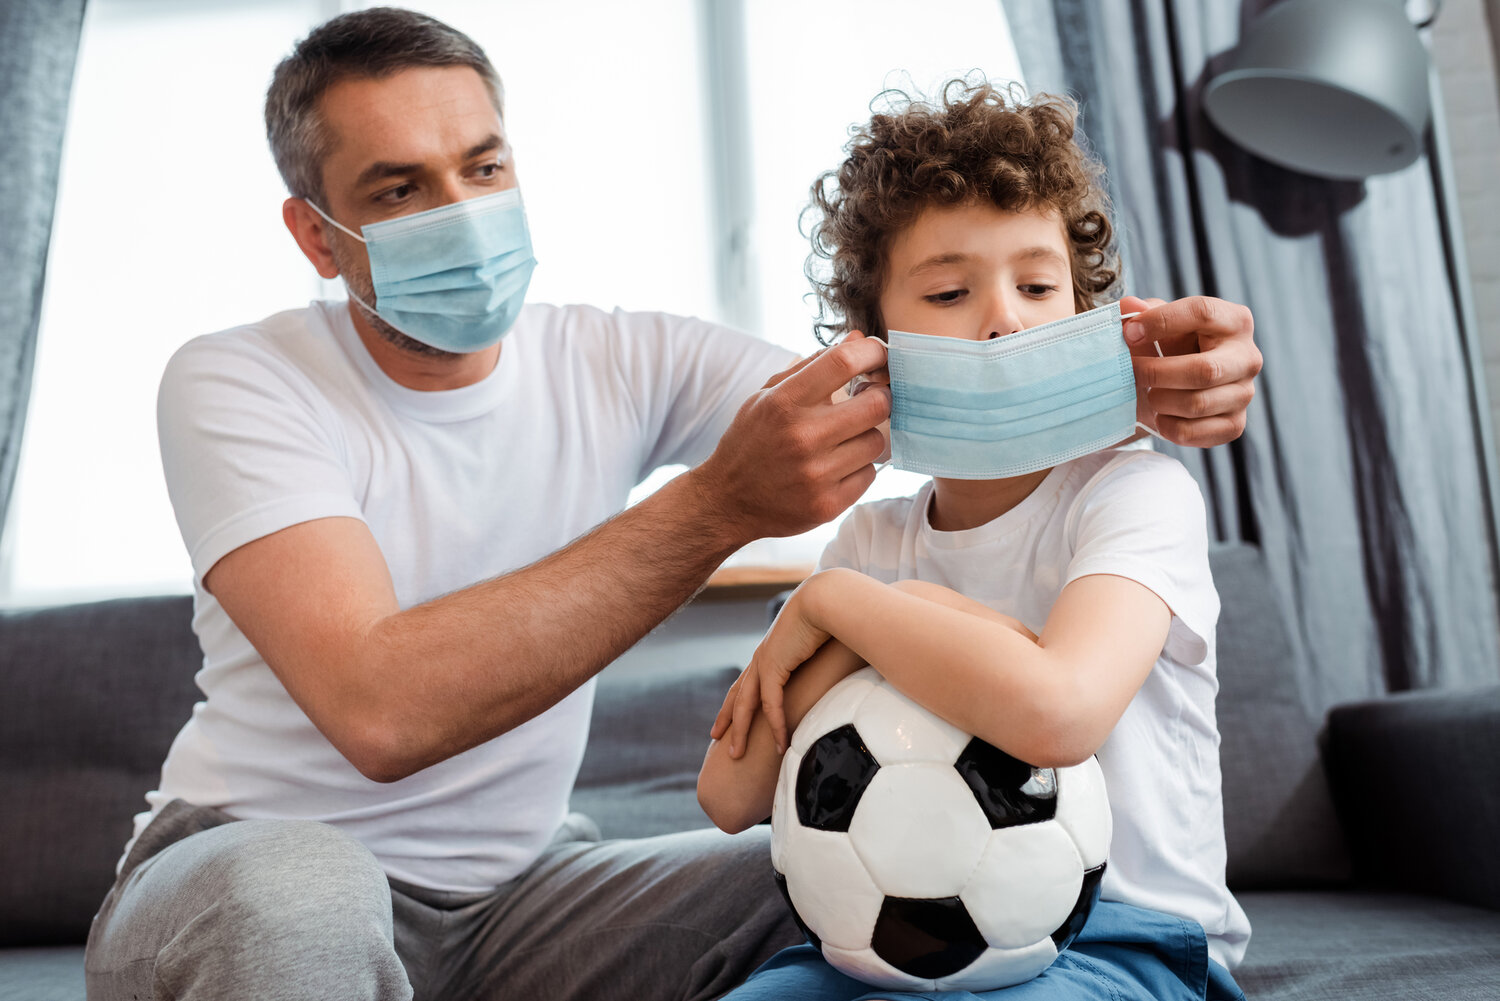 Mask up when ill with a respiratory illness